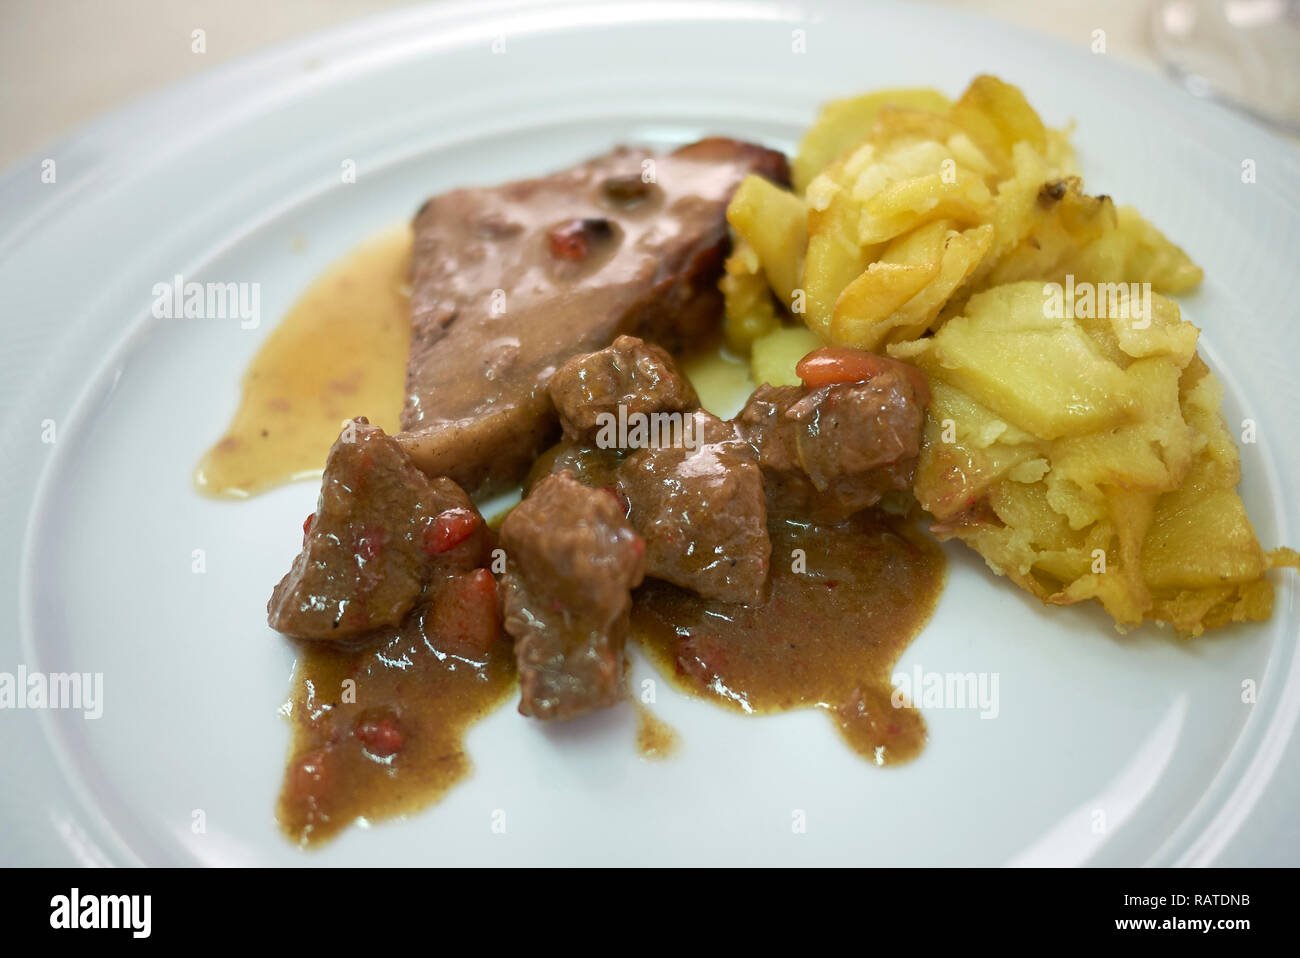 Roasted podolica meat with roasted potatoes Stock Photo